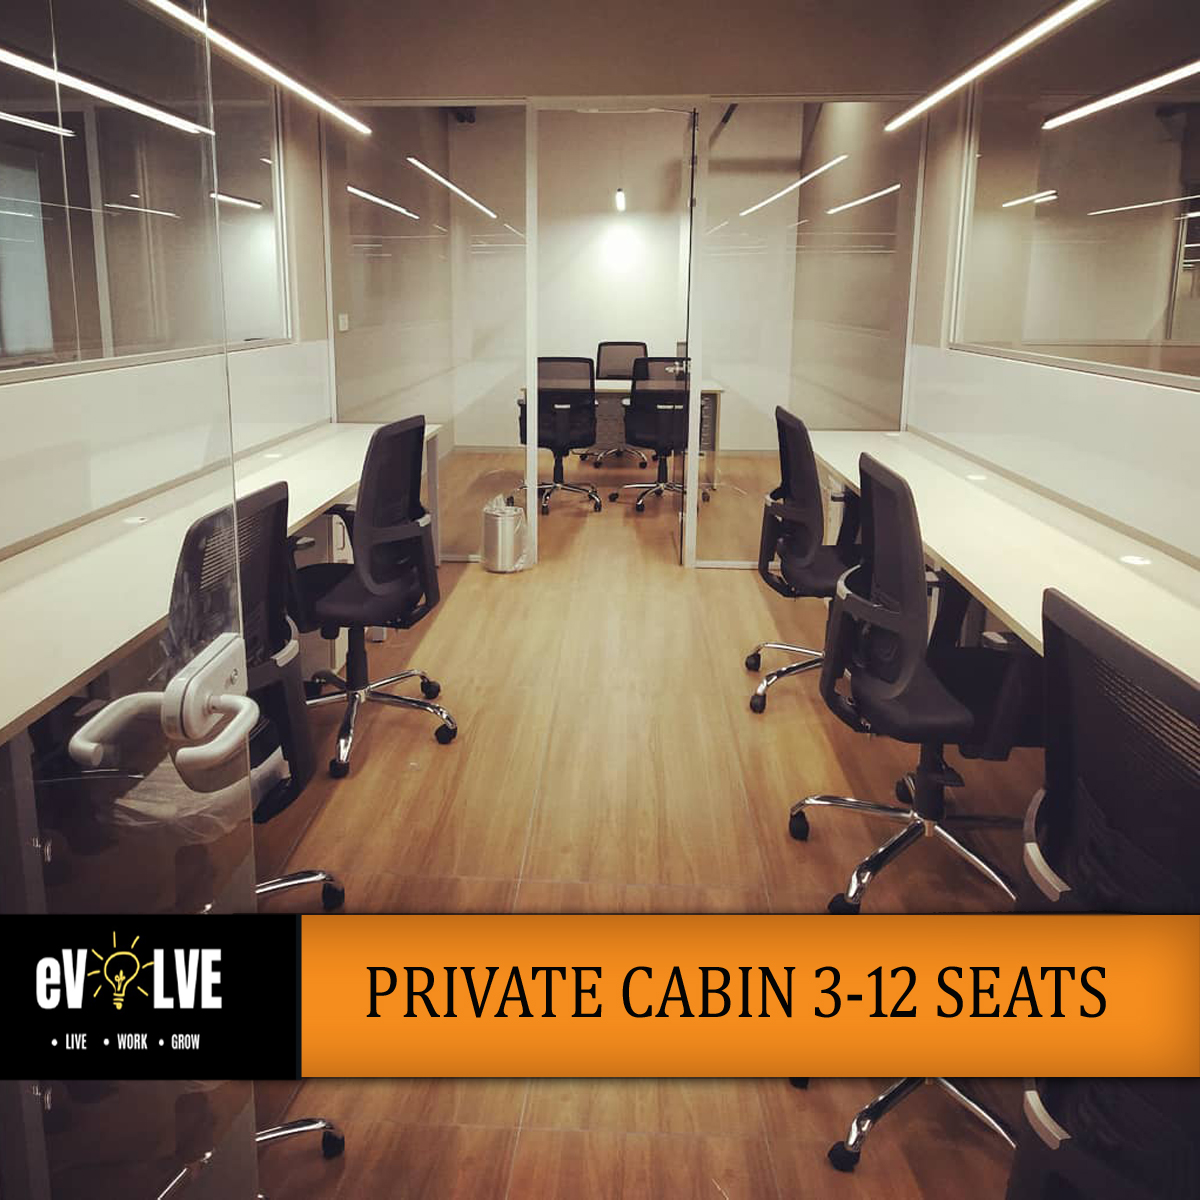 Best Private Cabins for Startup in whitefield